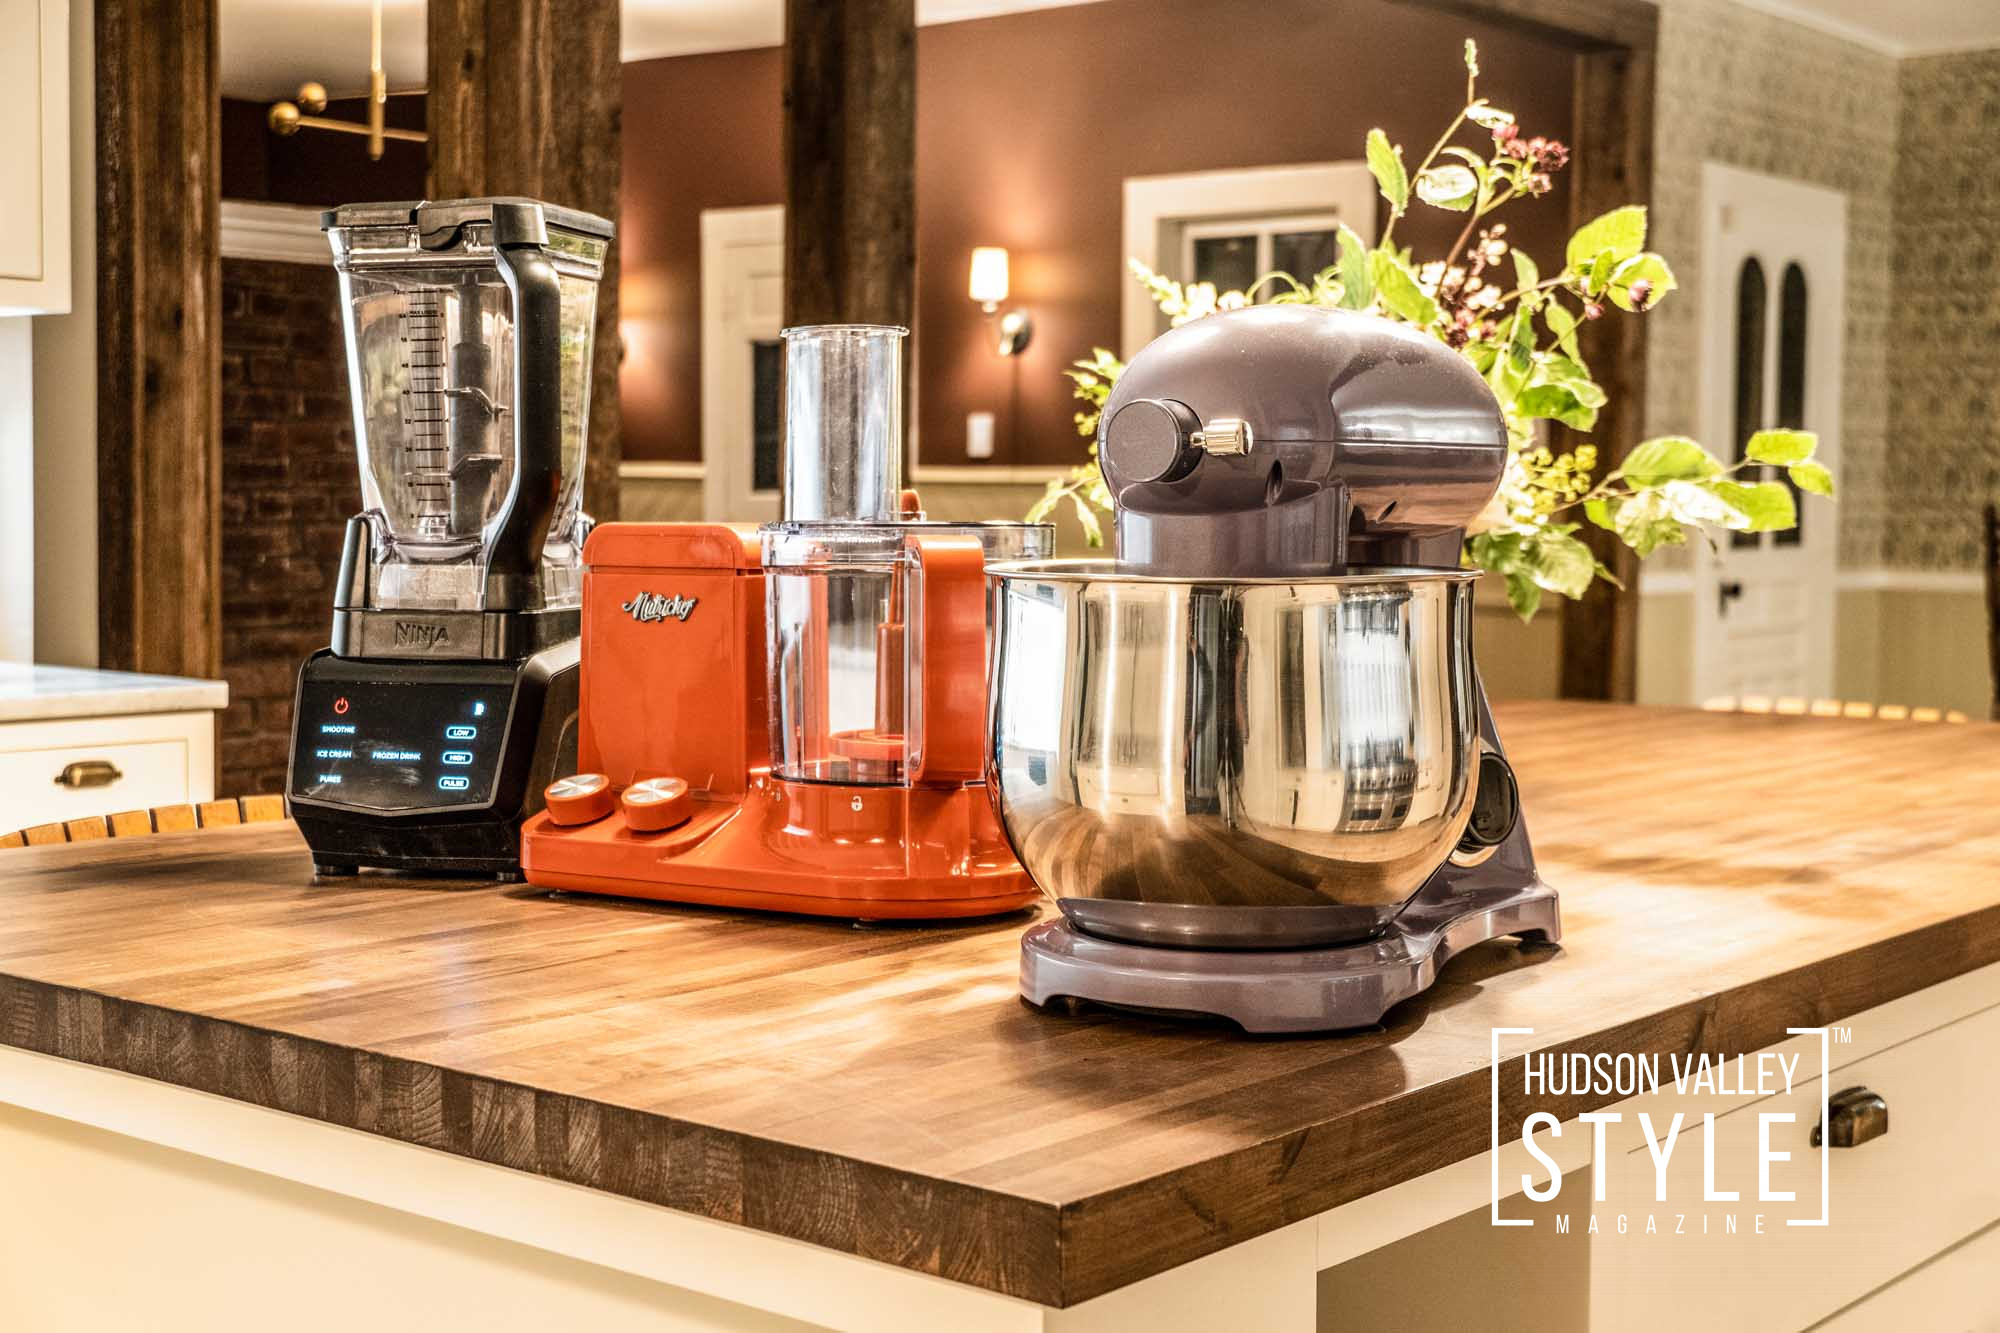 Top 10 Kitchen Appliances That Will Make Your Life Easier